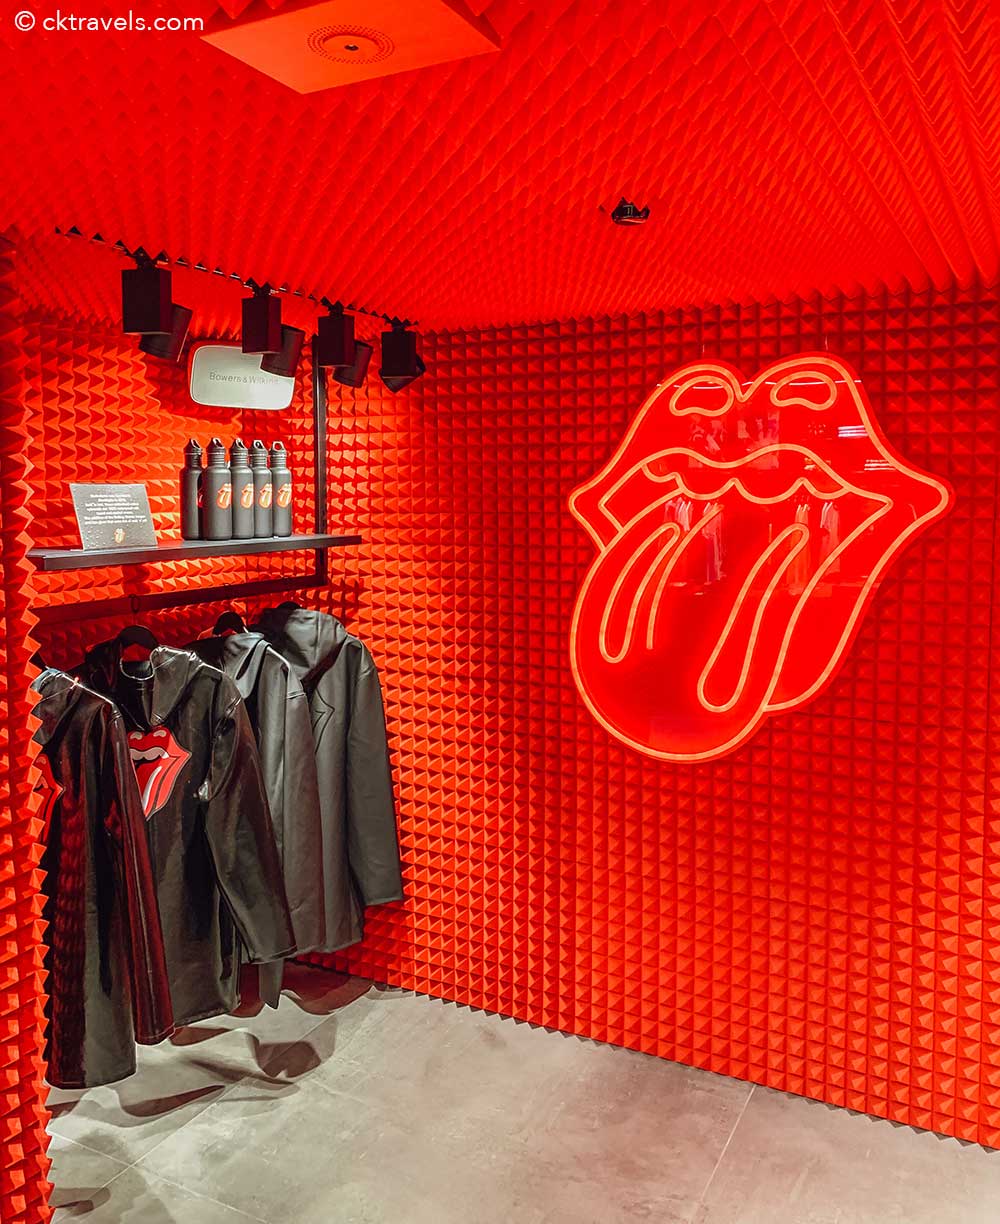 Rollings Stones shop Carnaby Street Oxford Circus London